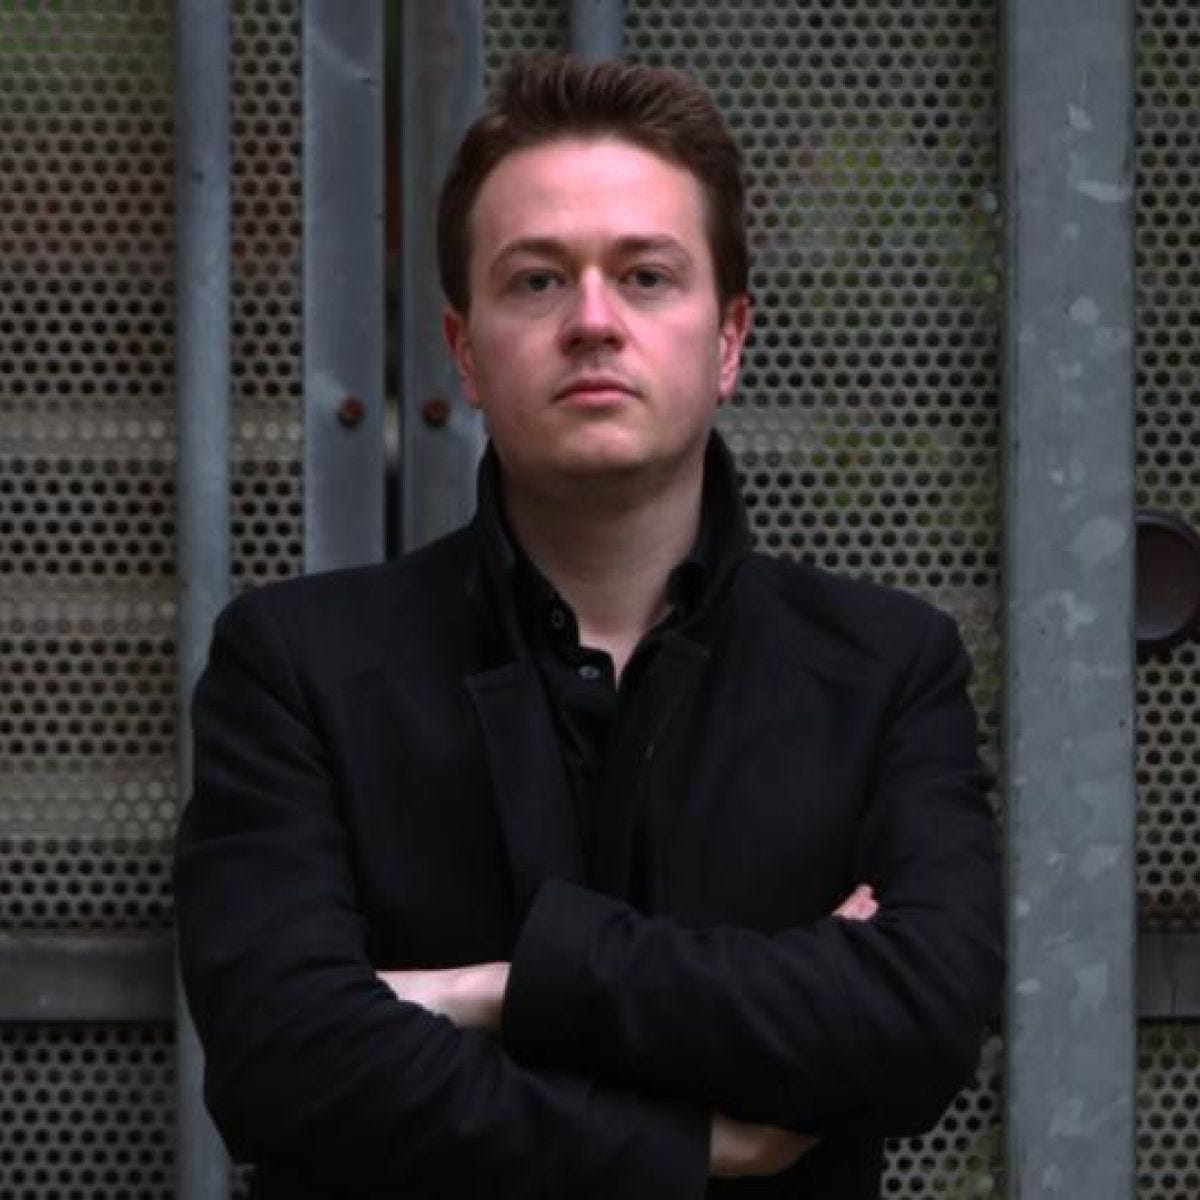 Johann Hari standing in front of a metal fence with his arms crossed